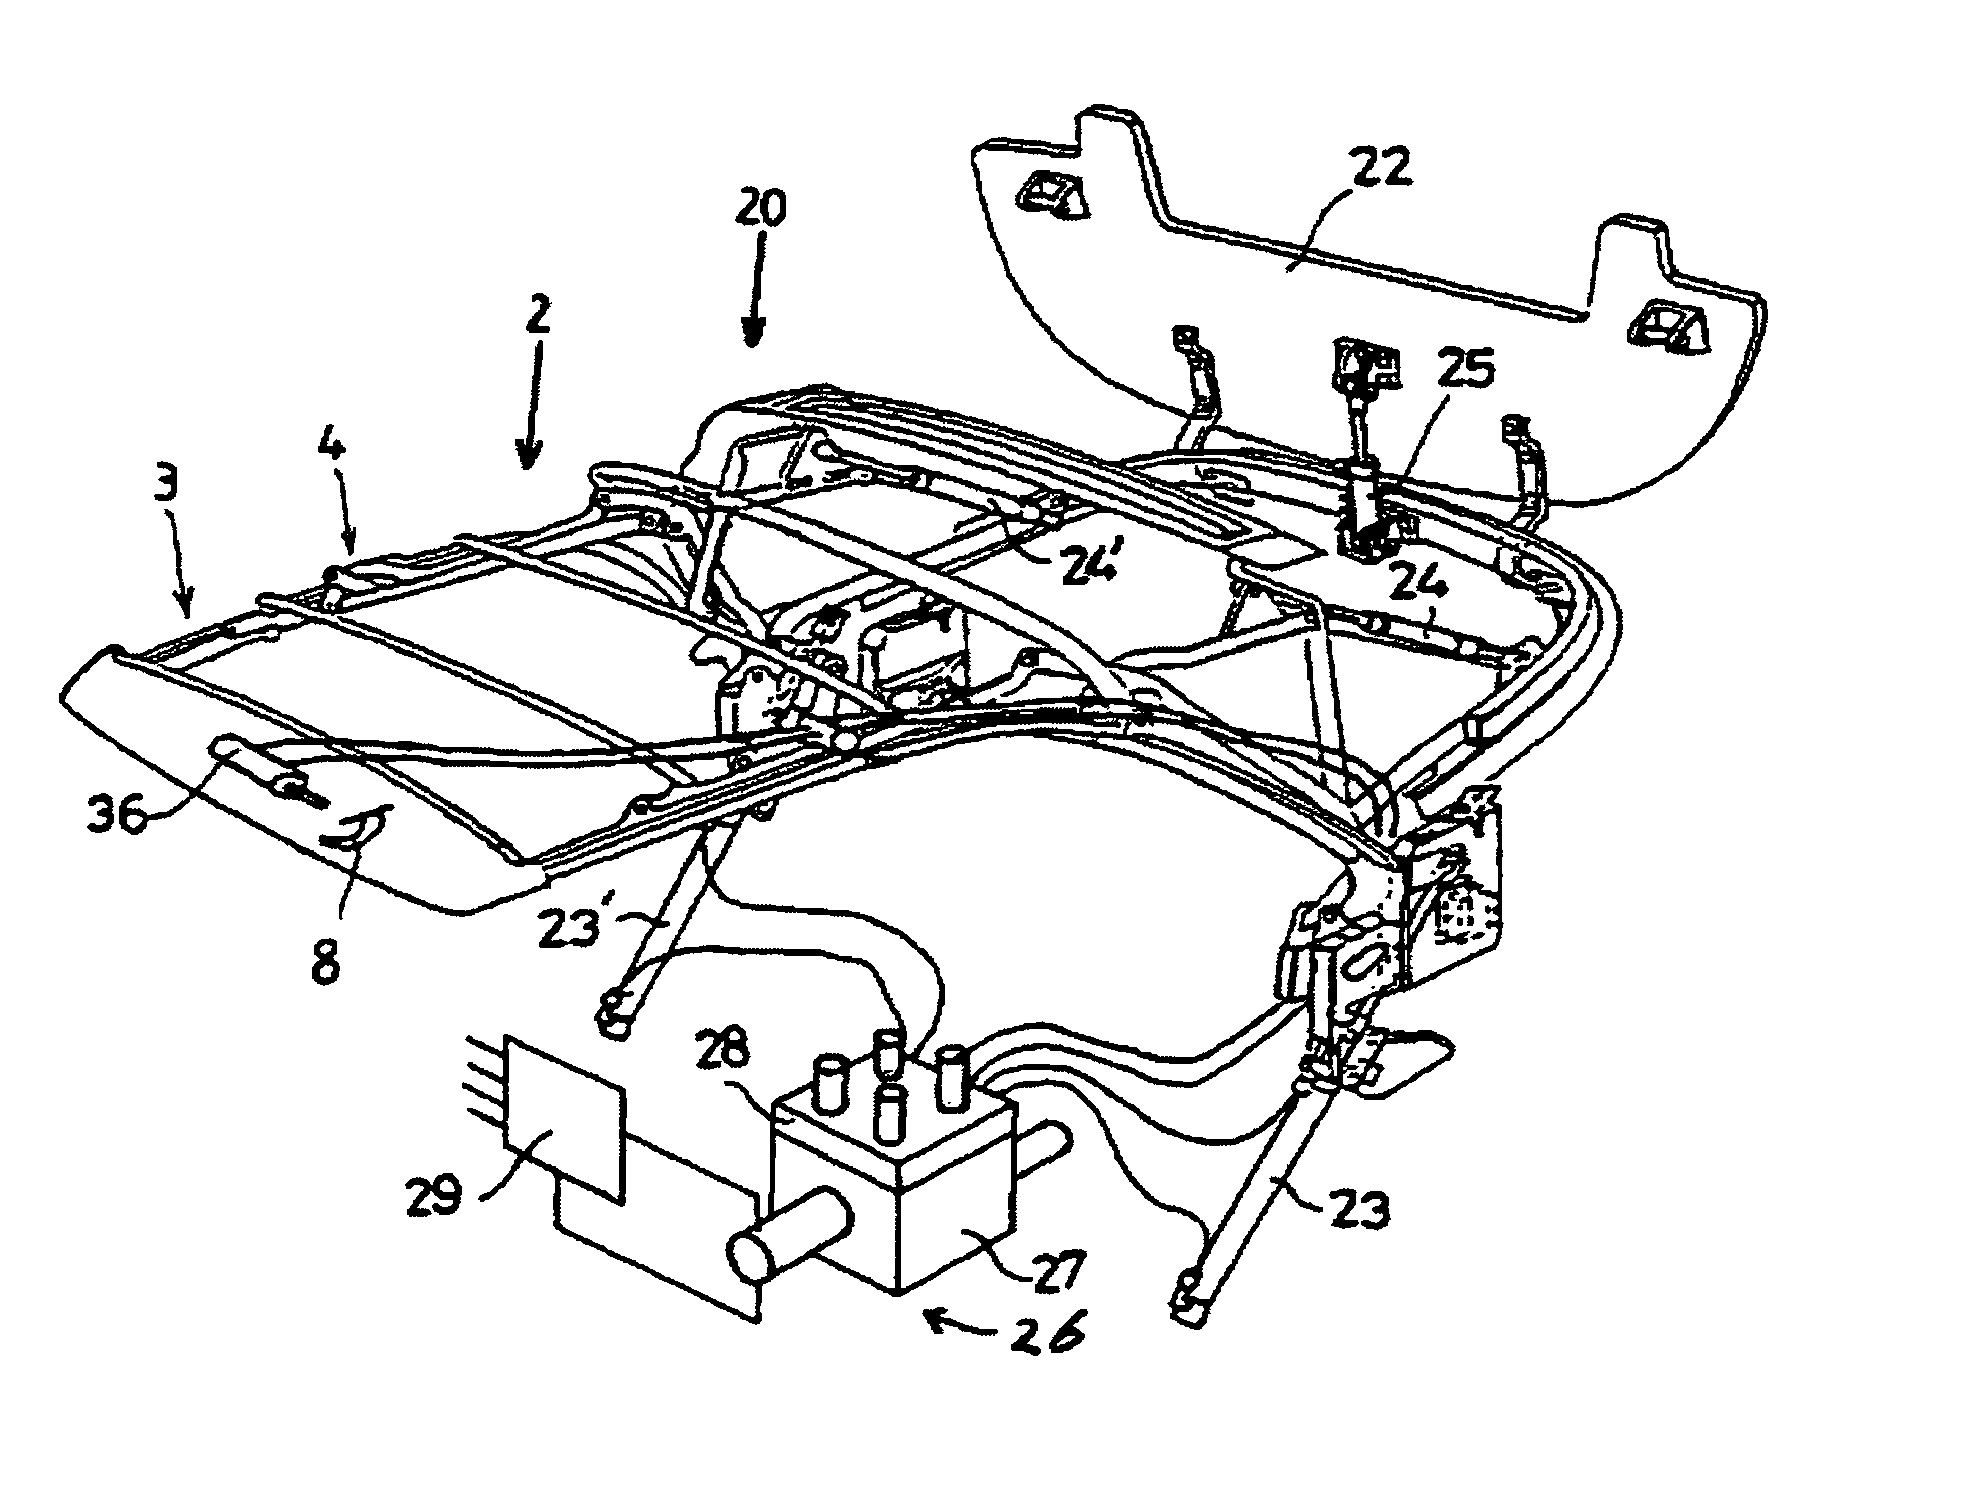 Hydraulic system with a pressure ripple reduction device